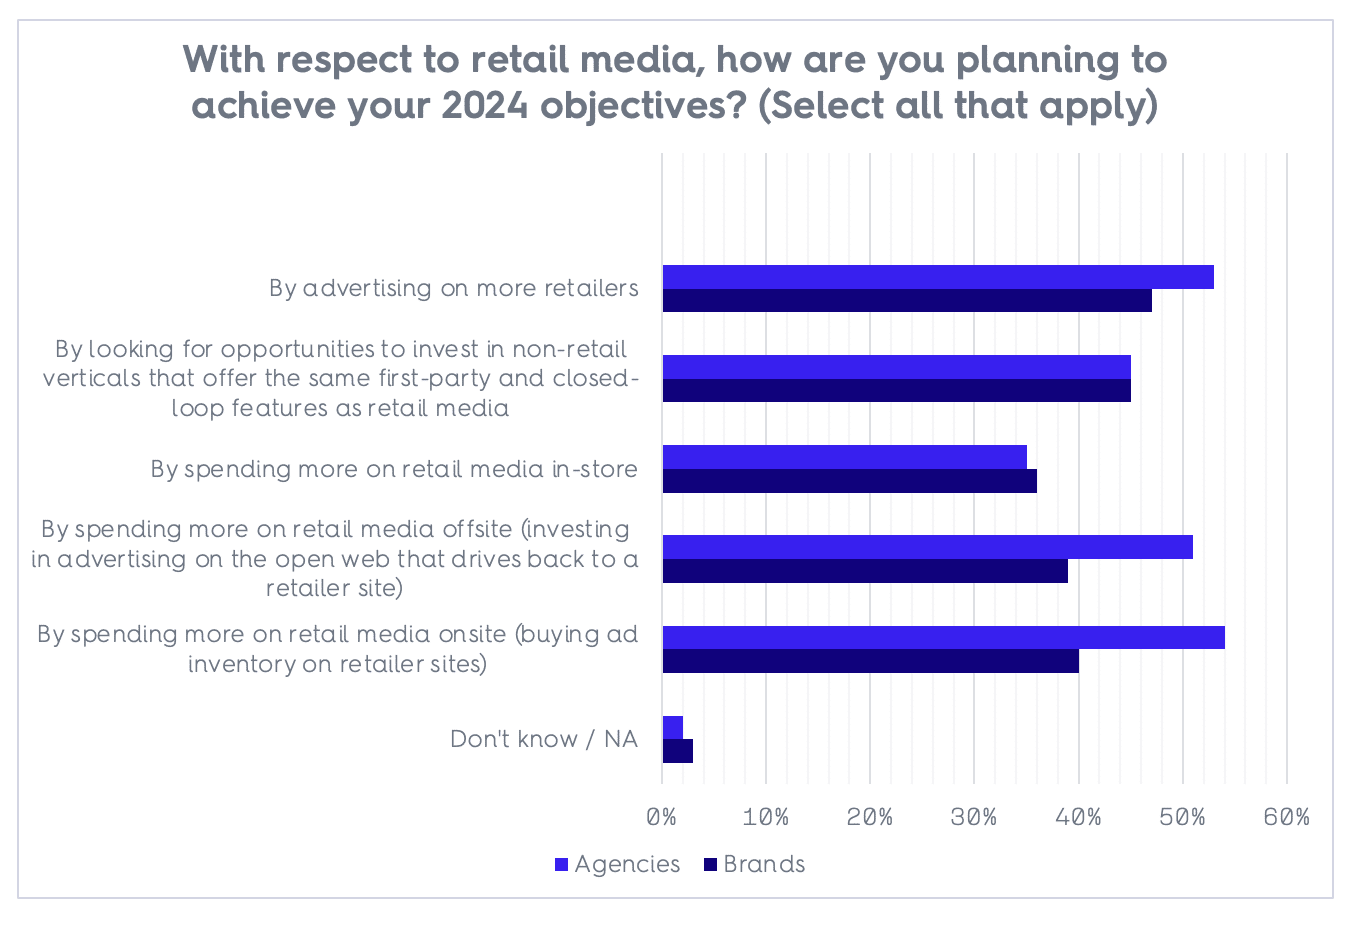 How brands and agencies will meet their 2024 retail media objectives